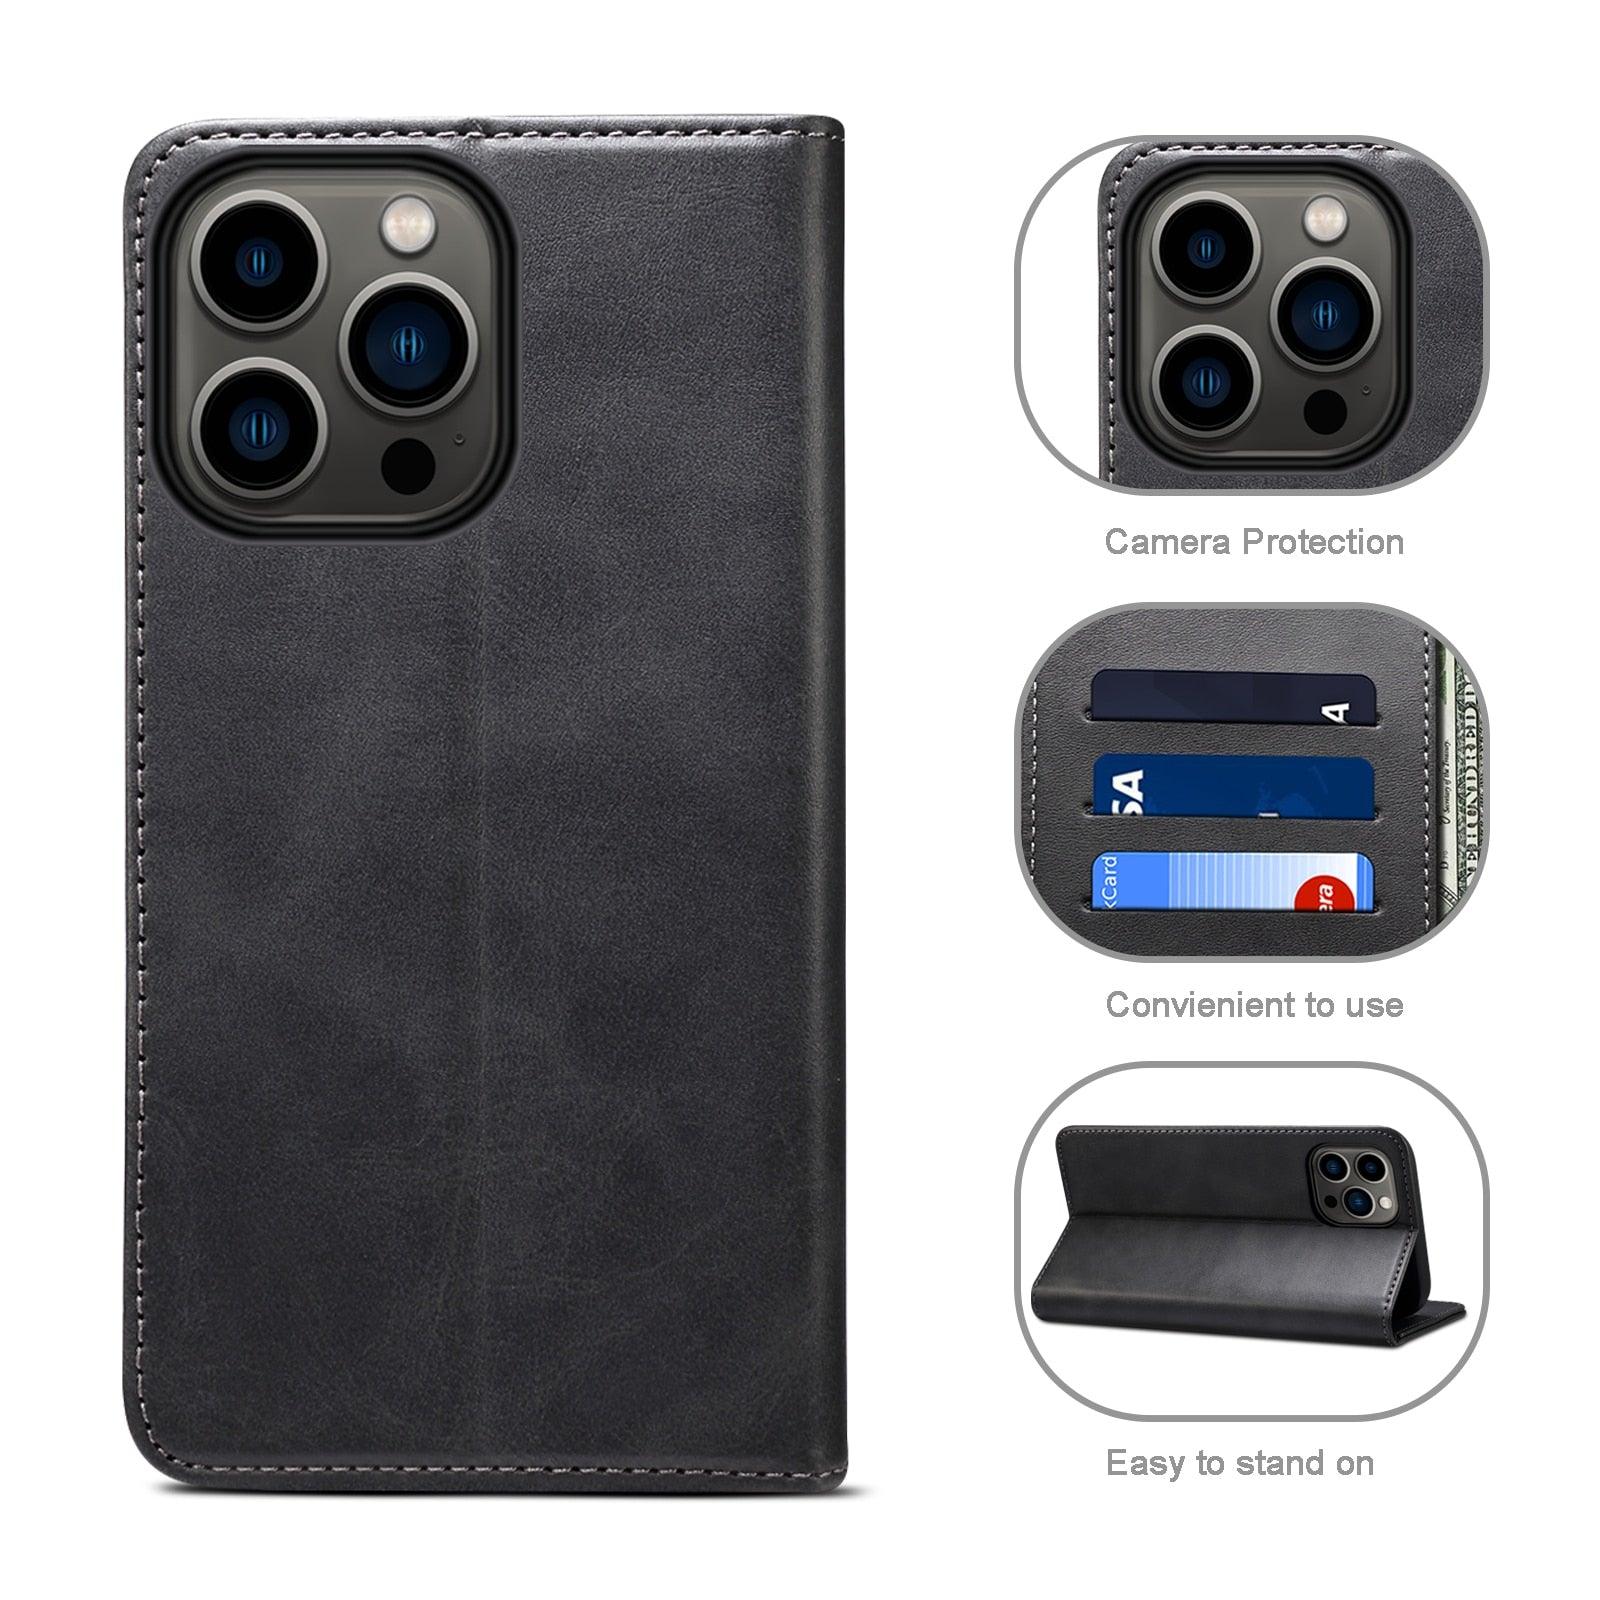 Magnetic Wallet Case for iPhone - PhoneWalletCases.com